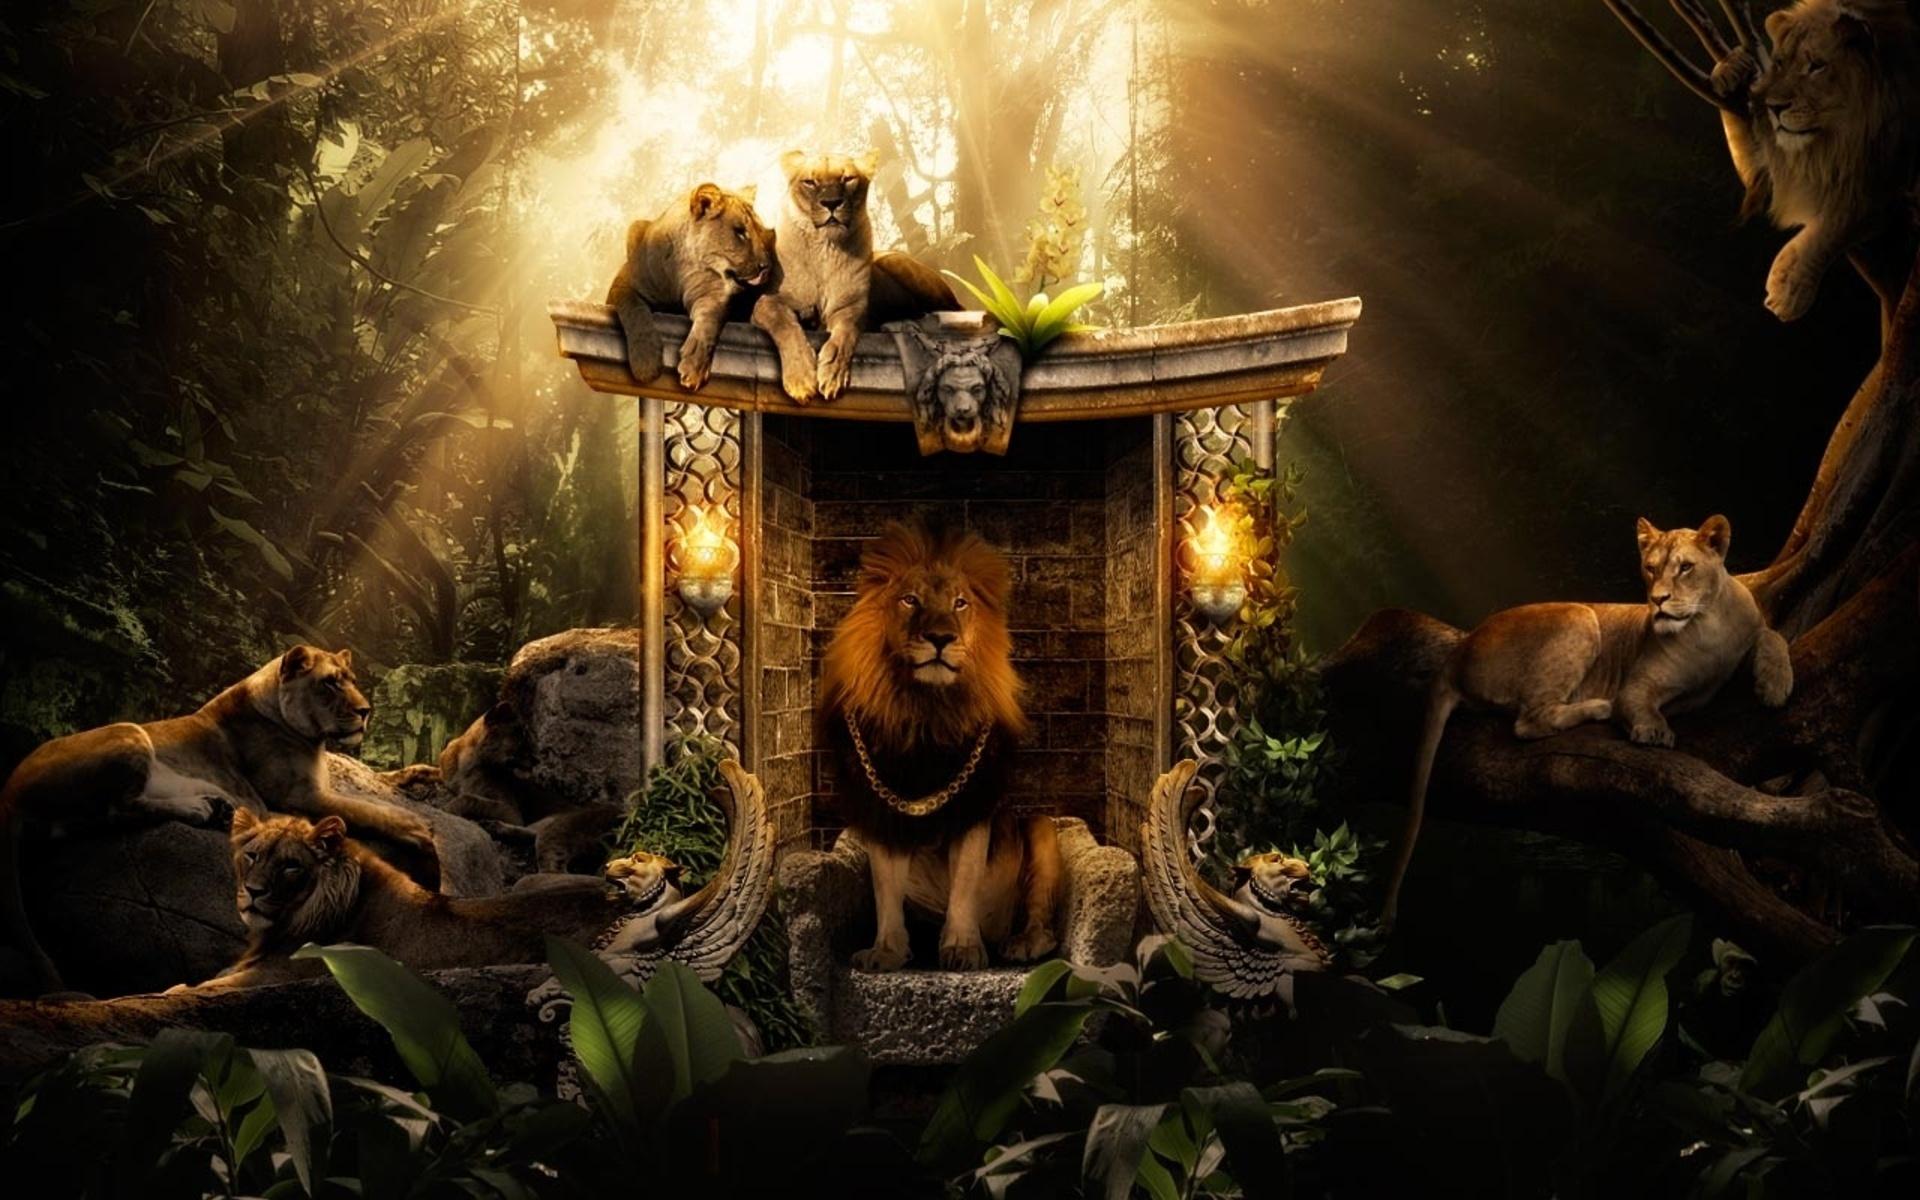 Lions Jungle Wallpaper in jpg format for free download